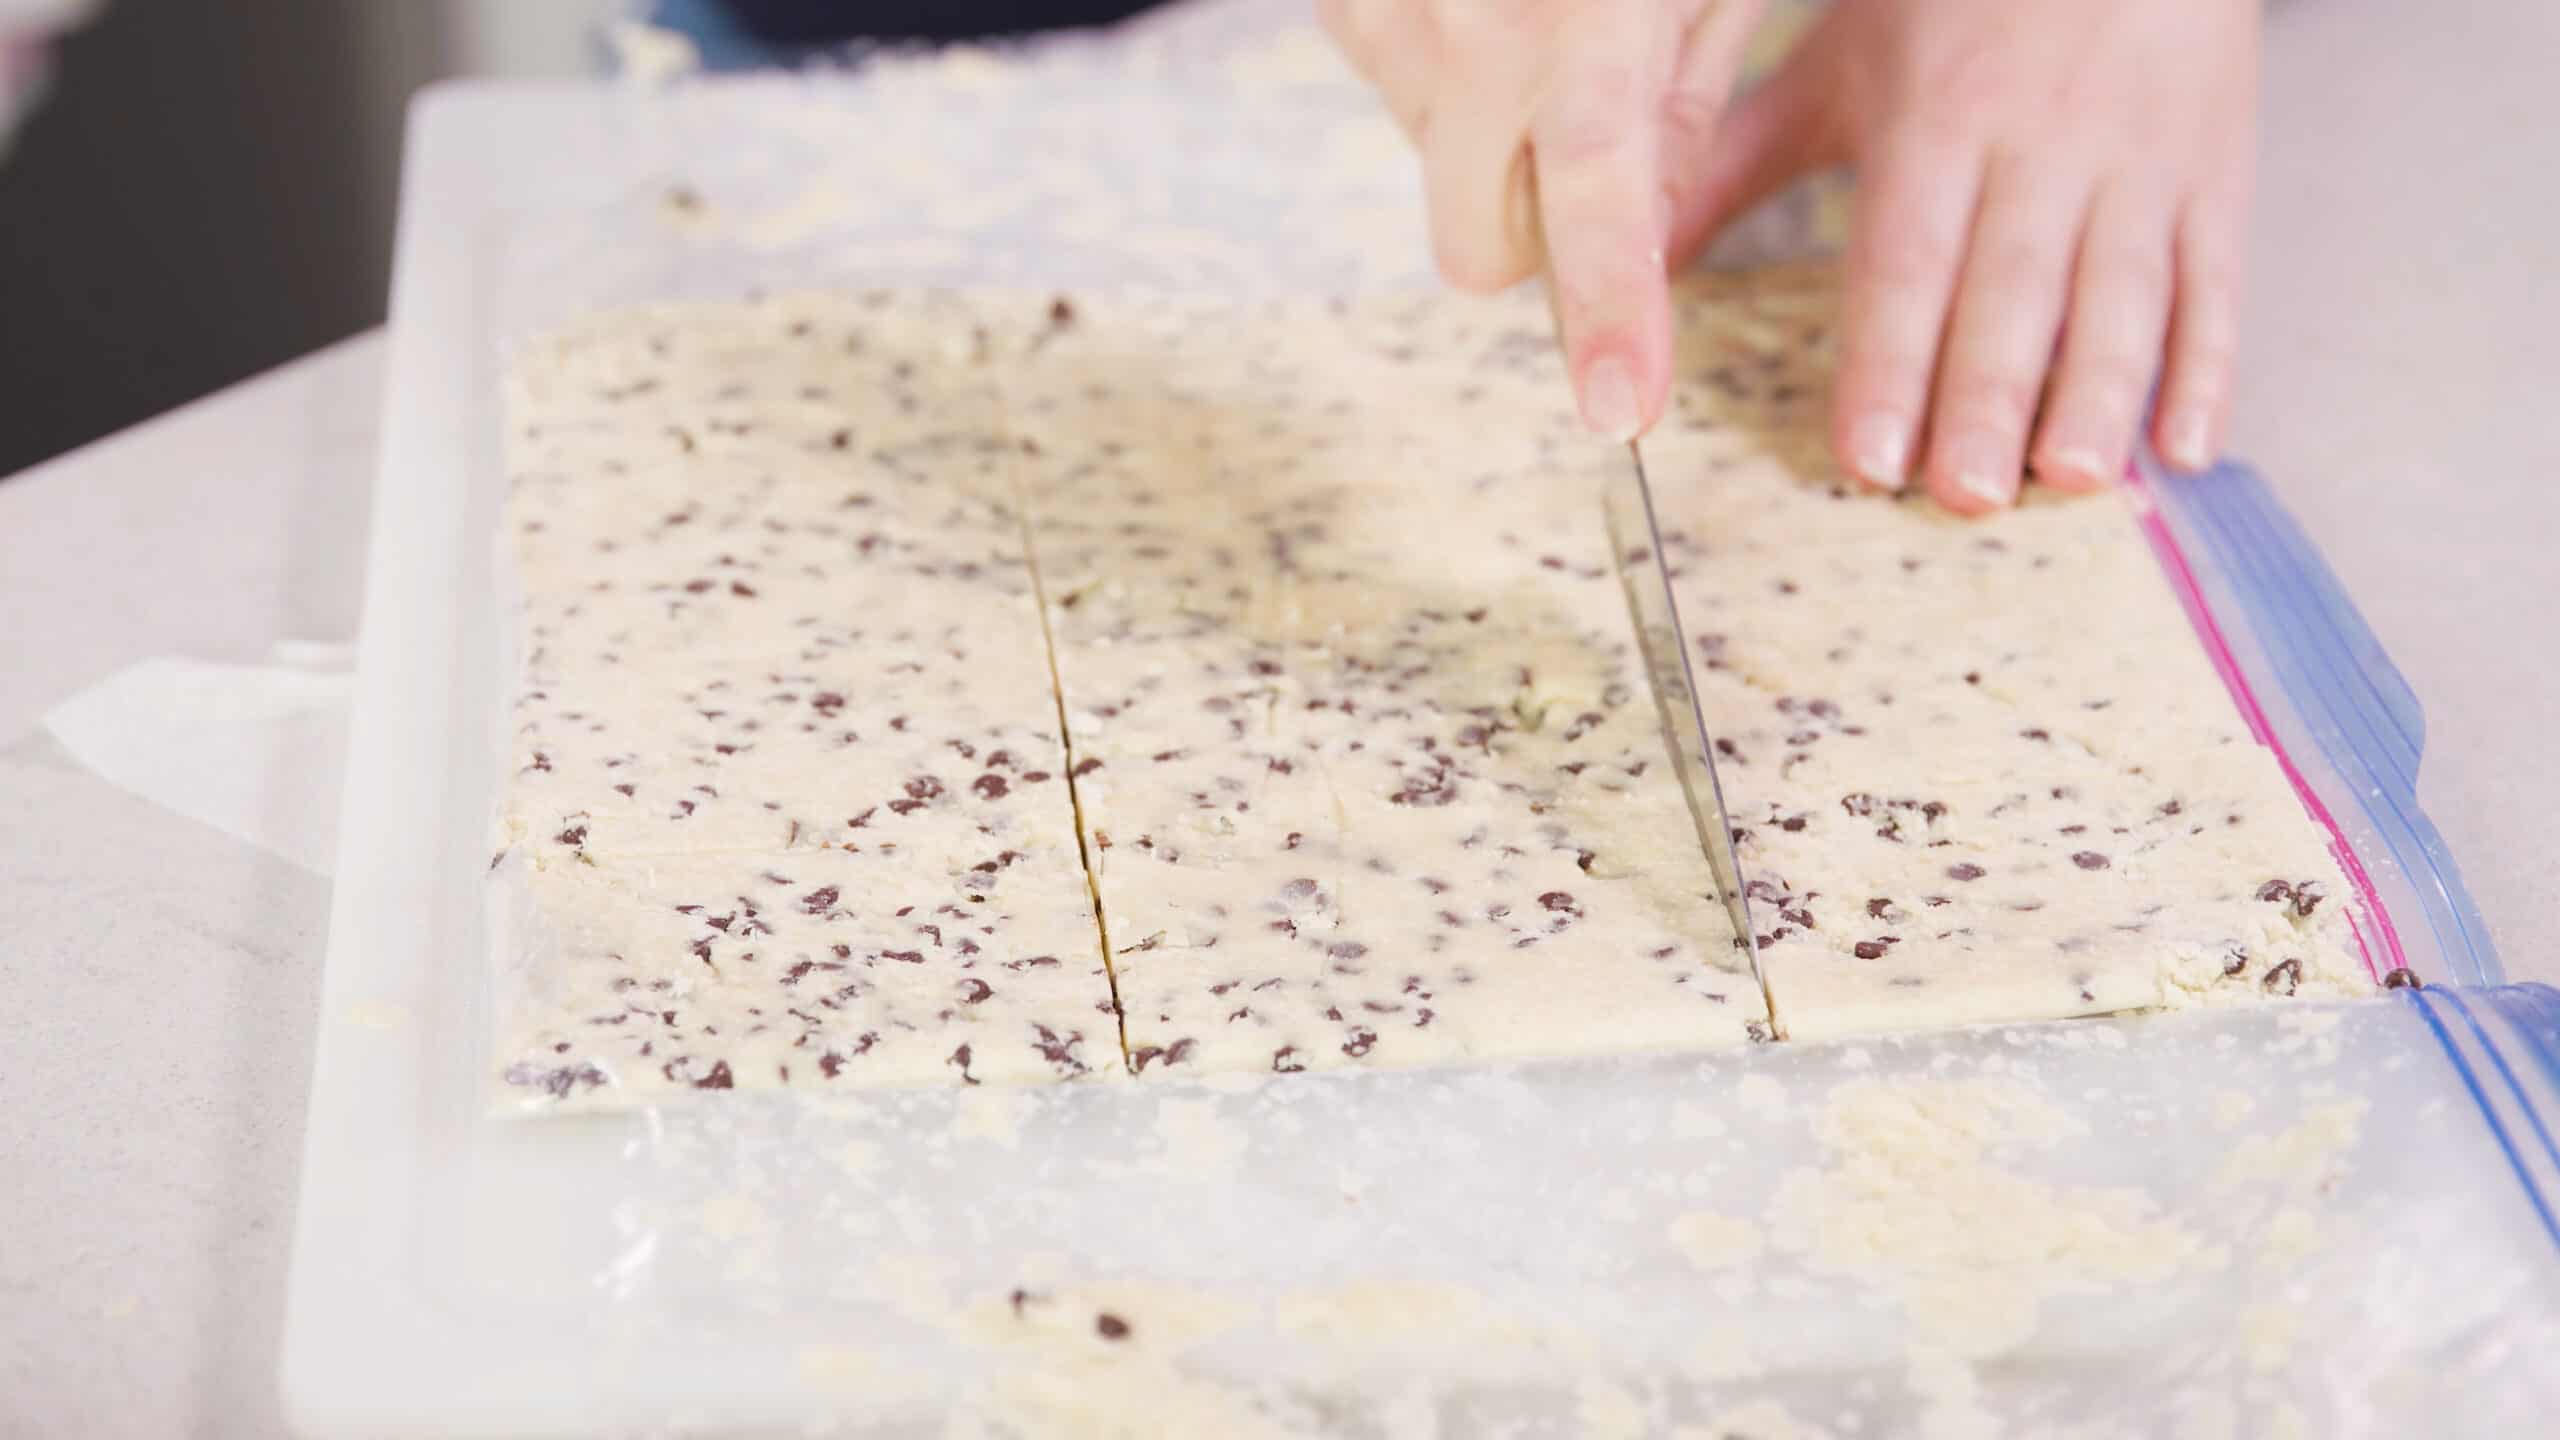 Angled view of a cut open clear plastic bag revealing the chocolate chip shortbread cookie dough and a kitchen knife cutting the dough into even sized rectangles.